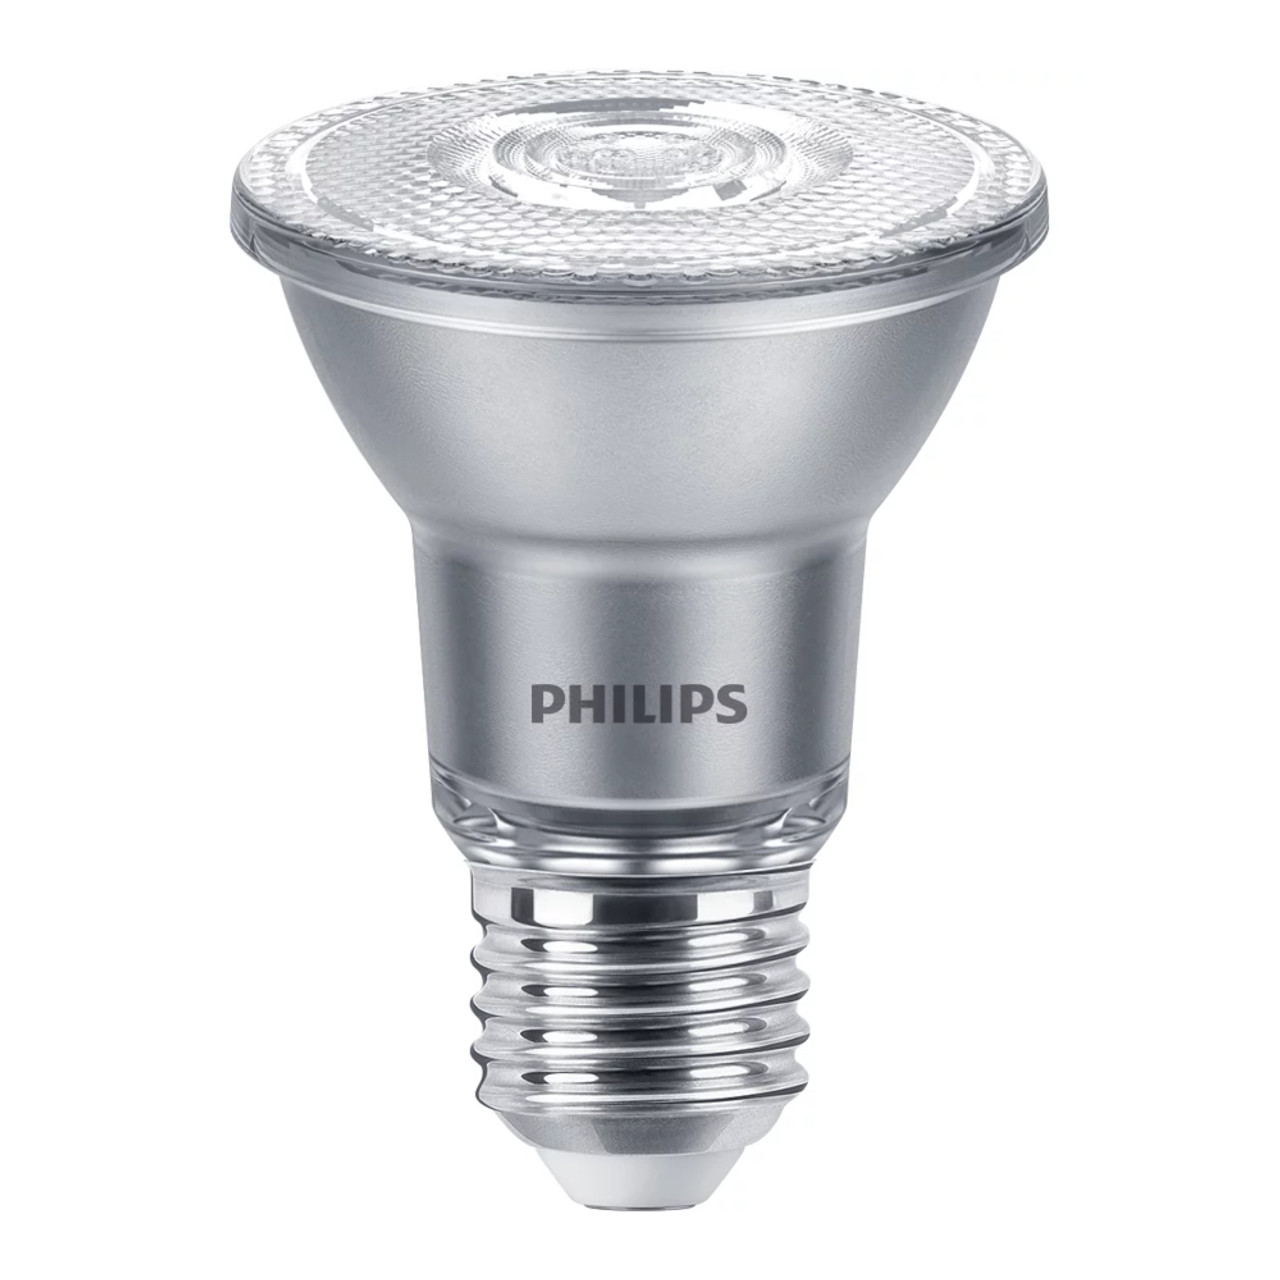 Philips LED PAR20 6W (50W eq.) Warm White 40 Degrees RA90 Dimmable